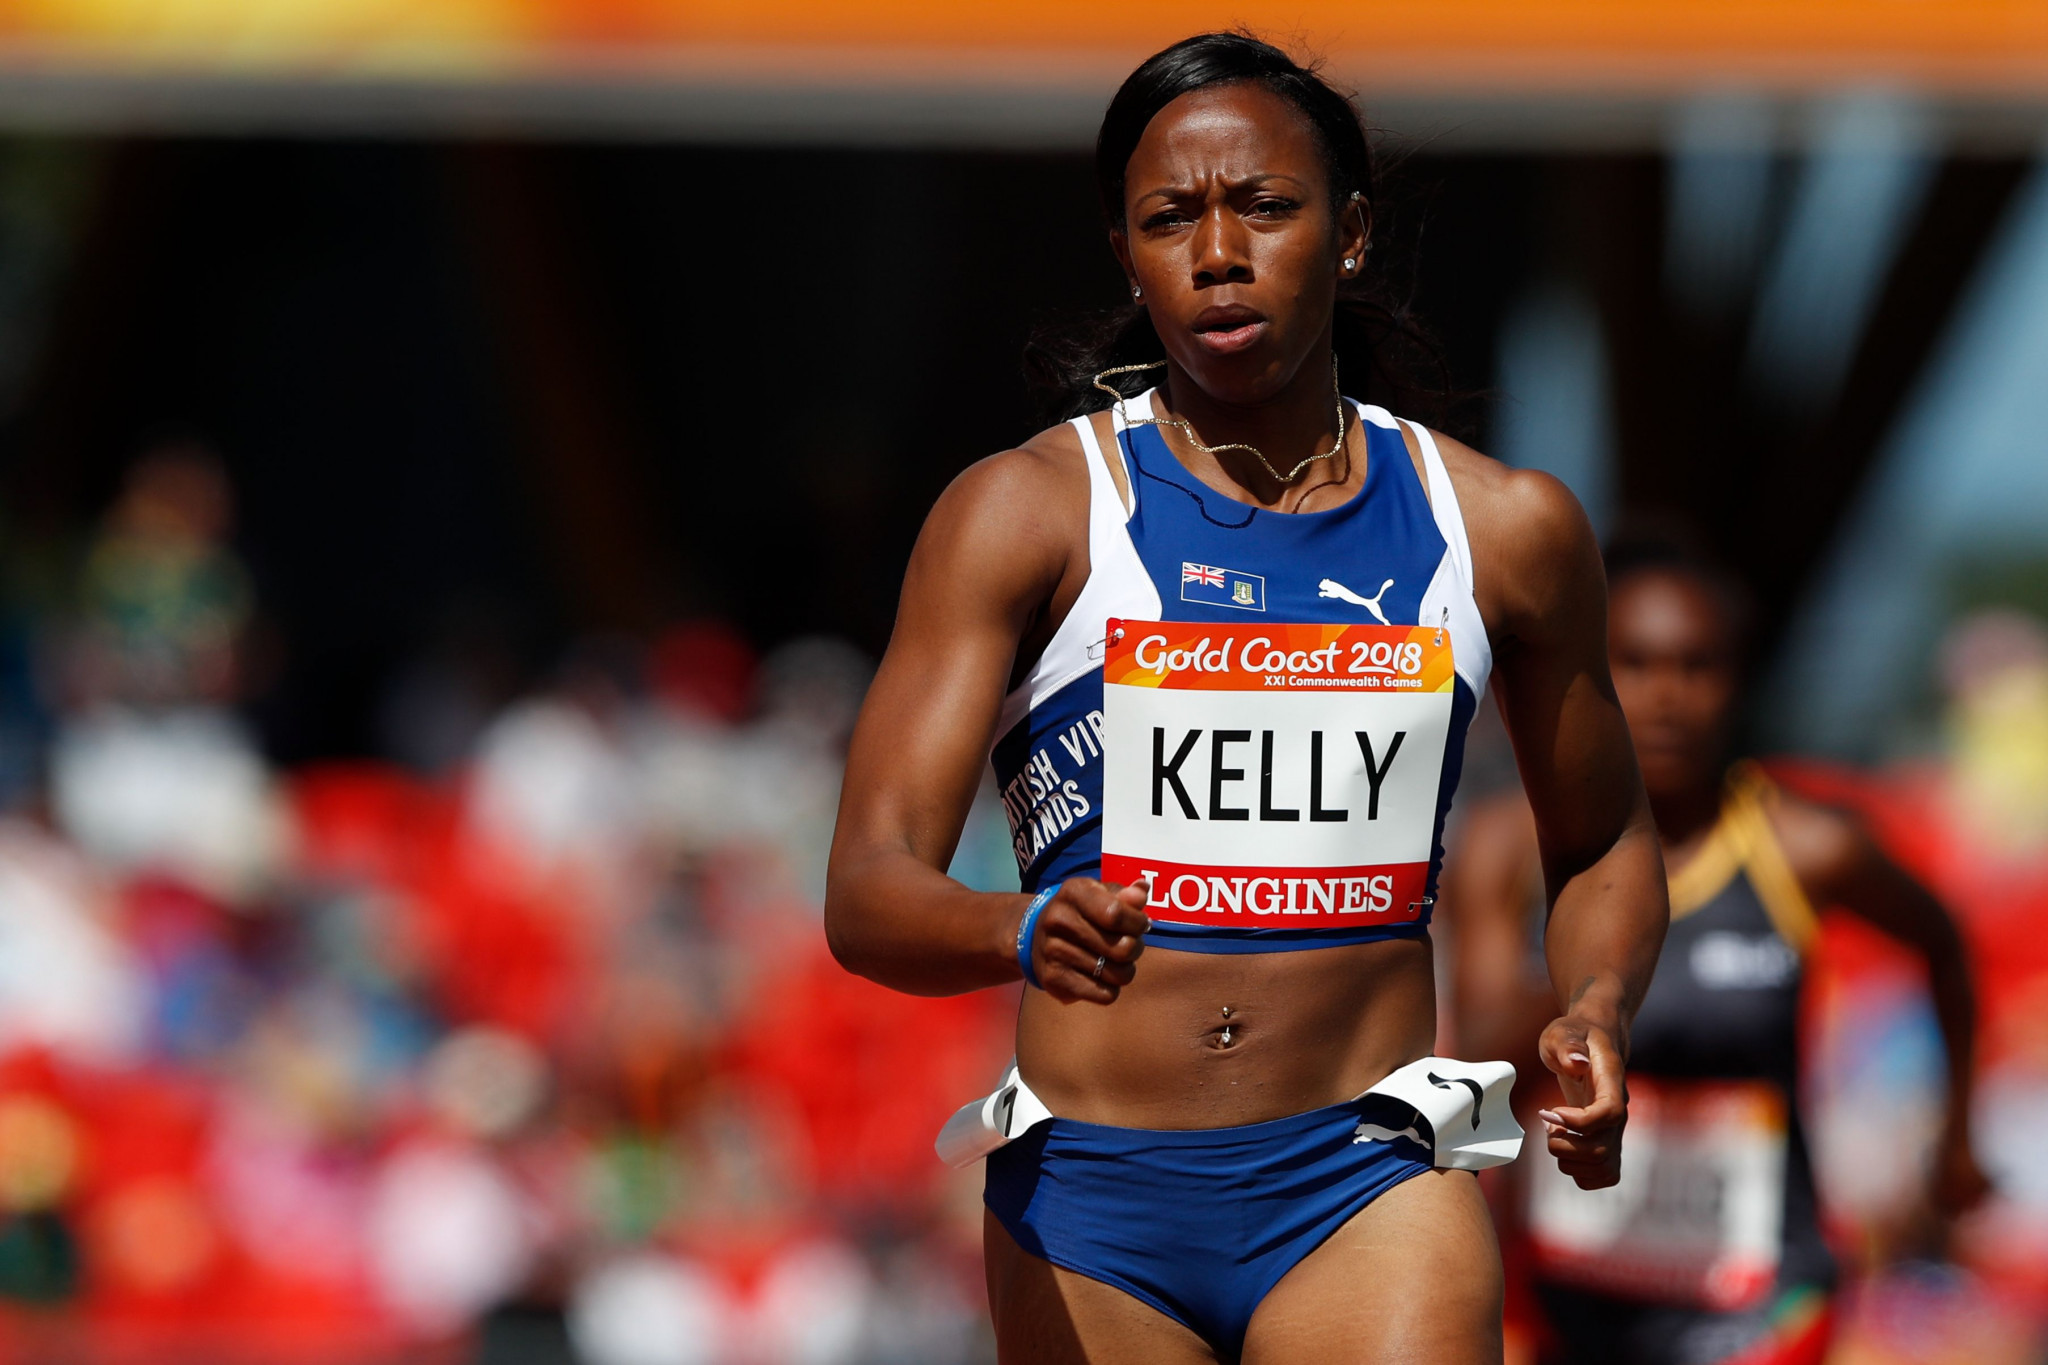 British Virgin Islands sprinter Ashley Kelly will now represent the Caribbean ©Getty Images